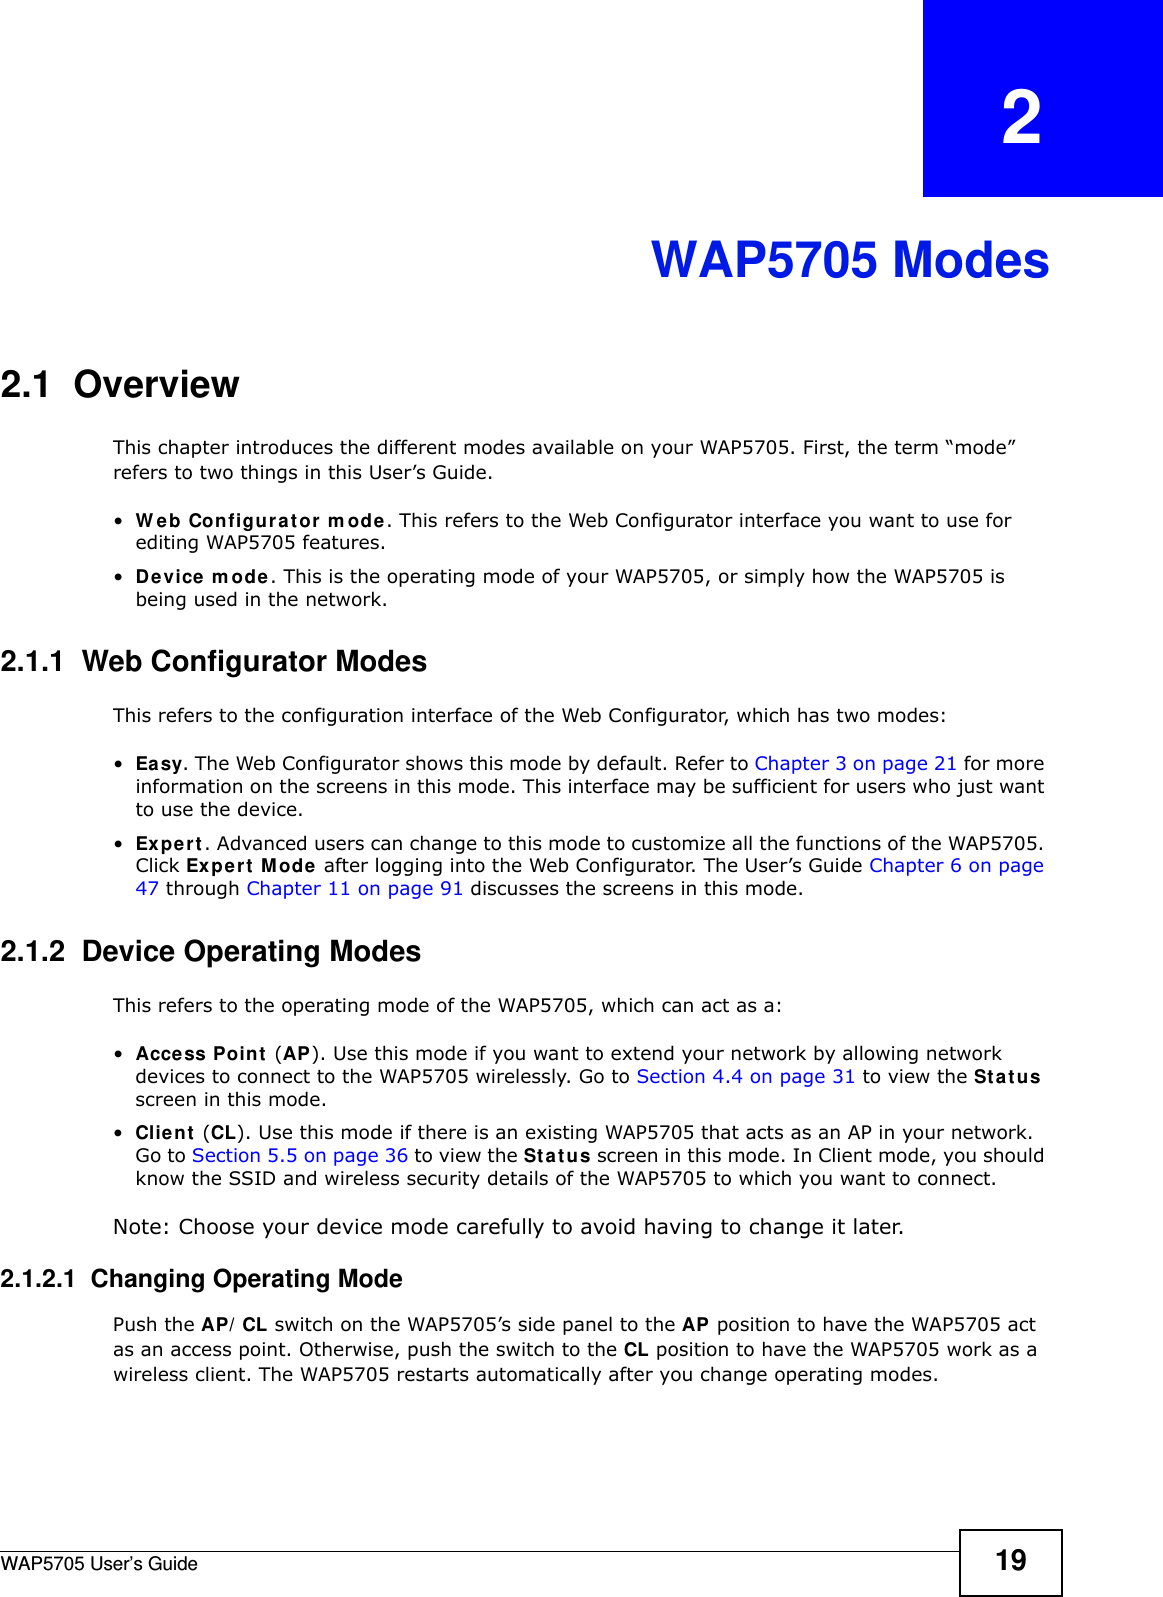 WAP5705 User’s Guide 19CHAPTER   2WAP5705 Modes2.1  OverviewThis chapter introduces the different modes available on your WAP5705. First, the term “mode” refers to two things in this User’s Guide.•W e b Configur a t or  m ode . This refers to the Web Configurator interface you want to use for editing WAP5705 features. •De vice m ode . This is the operating mode of your WAP5705, or simply how the WAP5705 is being used in the network. 2.1.1  Web Configurator ModesThis refers to the configuration interface of the Web Configurator, which has two modes:•Ea sy. The Web Configurator shows this mode by default. Refer to Chapter 3 on page 21 for more information on the screens in this mode. This interface may be sufficient for users who just want to use the device.•Ex p er t . Advanced users can change to this mode to customize all the functions of the WAP5705. Click Ex per t  M ode after logging into the Web Configurator. The User’s Guide Chapter 6 on page 47 through Chapter 11 on page 91 discusses the screens in this mode.2.1.2  Device Operating ModesThis refers to the operating mode of the WAP5705, which can act as a:•Acce ss Point (AP). Use this mode if you want to extend your network by allowing network devices to connect to the WAP5705 wirelessly. Go to Section 4.4 on page 31 to view the St a t us screen in this mode.•Client  (CL). Use this mode if there is an existing WAP5705 that acts as an AP in your network. Go to Section 5.5 on page 36 to view the St a t u s screen in this mode. In Client mode, you should know the SSID and wireless security details of the WAP5705 to which you want to connect.Note: Choose your device mode carefully to avoid having to change it later.2.1.2.1  Changing Operating ModePush the AP/ CL switch on the WAP5705’s side panel to the AP position to have the WAP5705 act as an access point. Otherwise, push the switch to the CL position to have the WAP5705 work as a wireless client. The WAP5705 restarts automatically after you change operating modes.